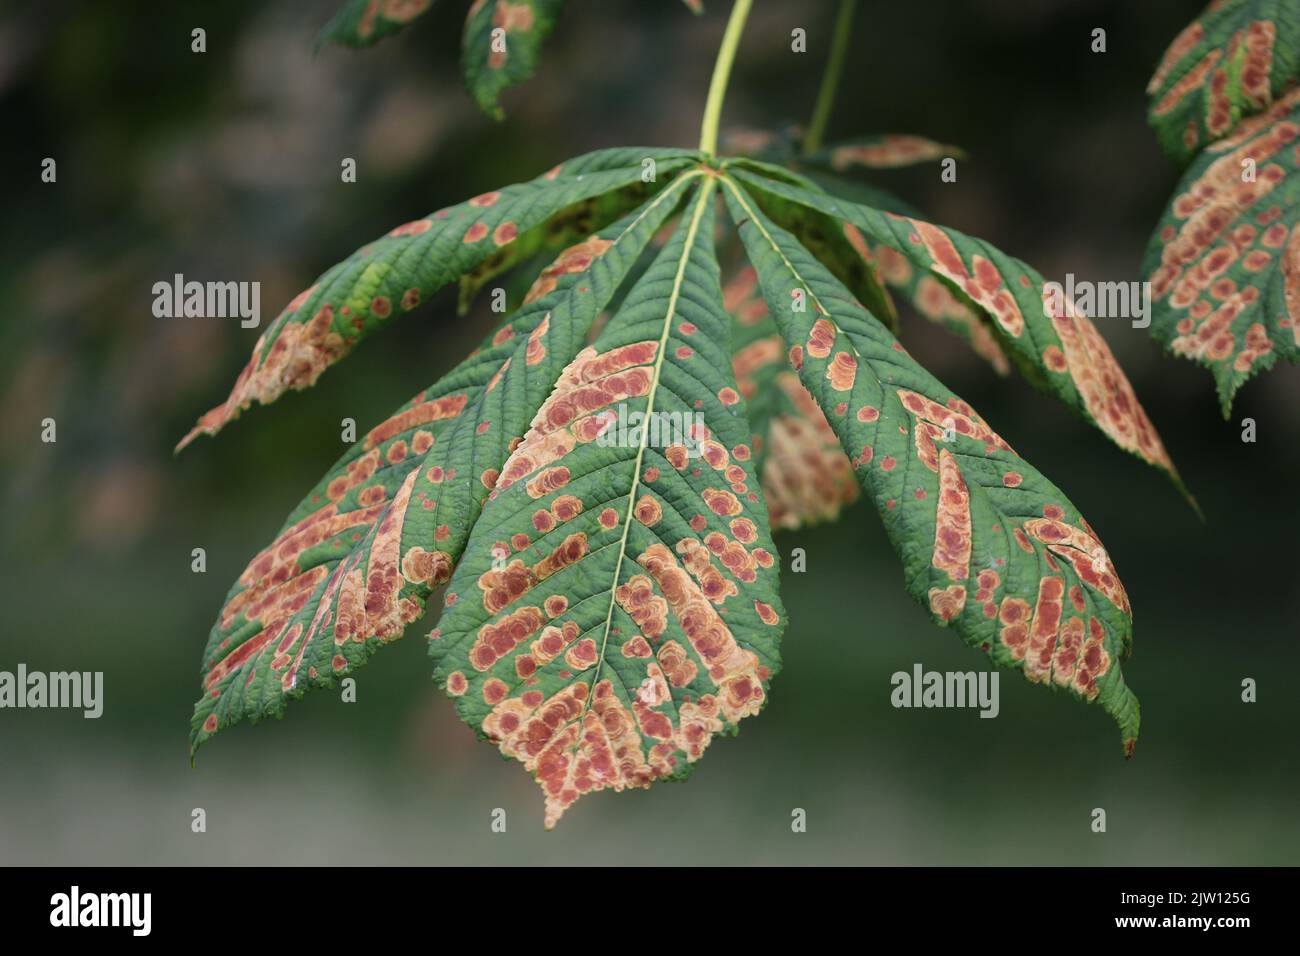 Horse chestnut, Aesculus hippocastanum, tree leaves covered in the mines of the Horse Chestnut leaf mining moth, Cameraria ohridella, with a blurred b Stock Photo